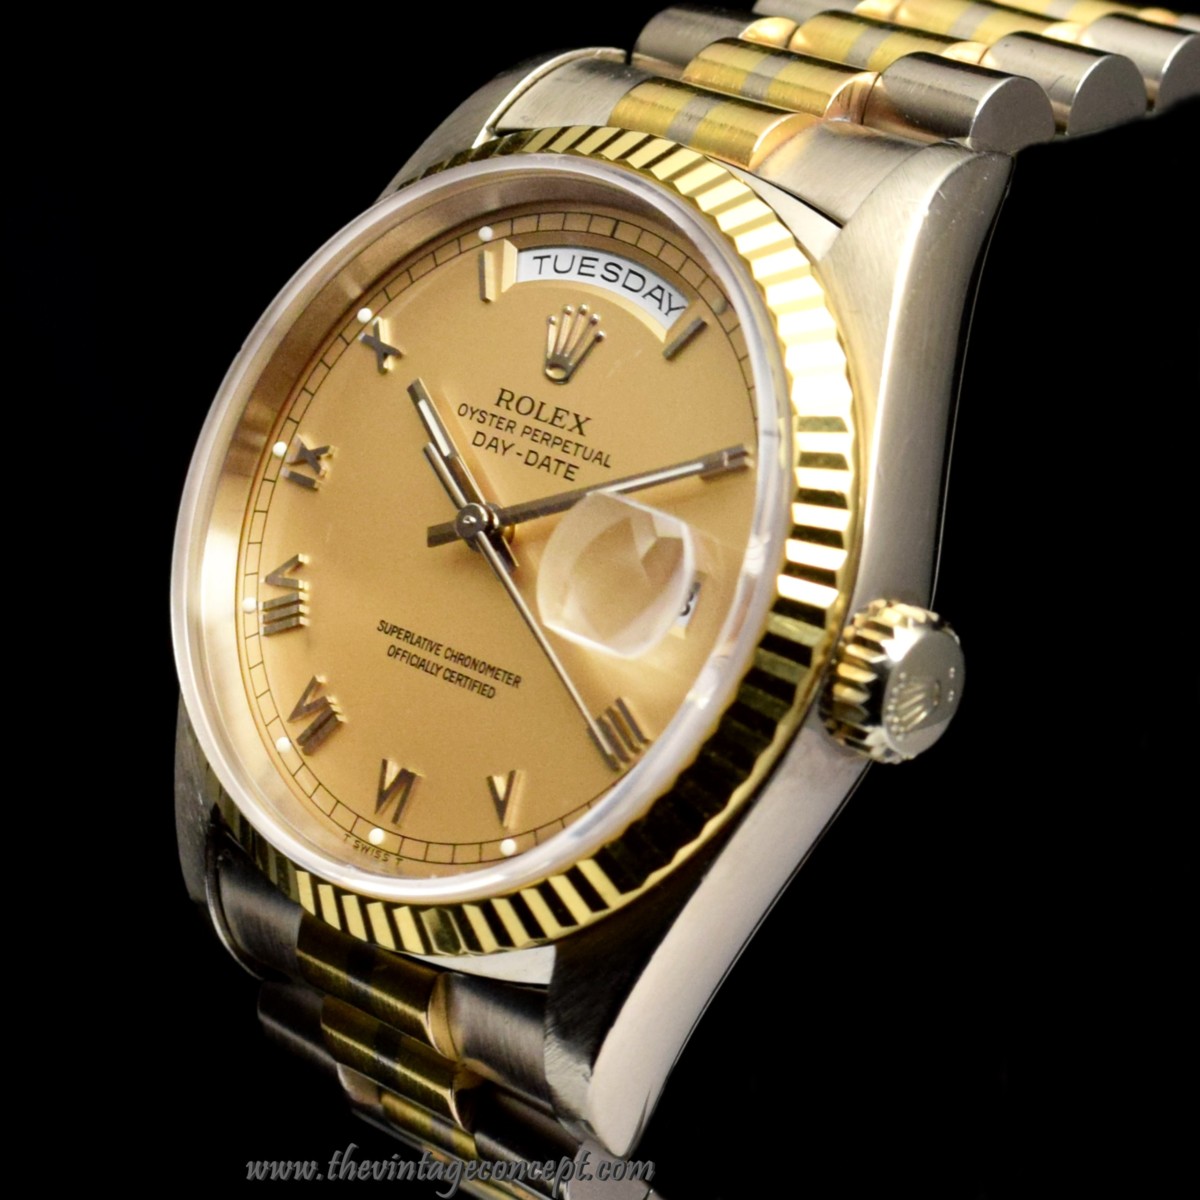 Rare Rolex Day-Date Two-Tones Roman Index 18239B (SOLD) - The Vintage ...